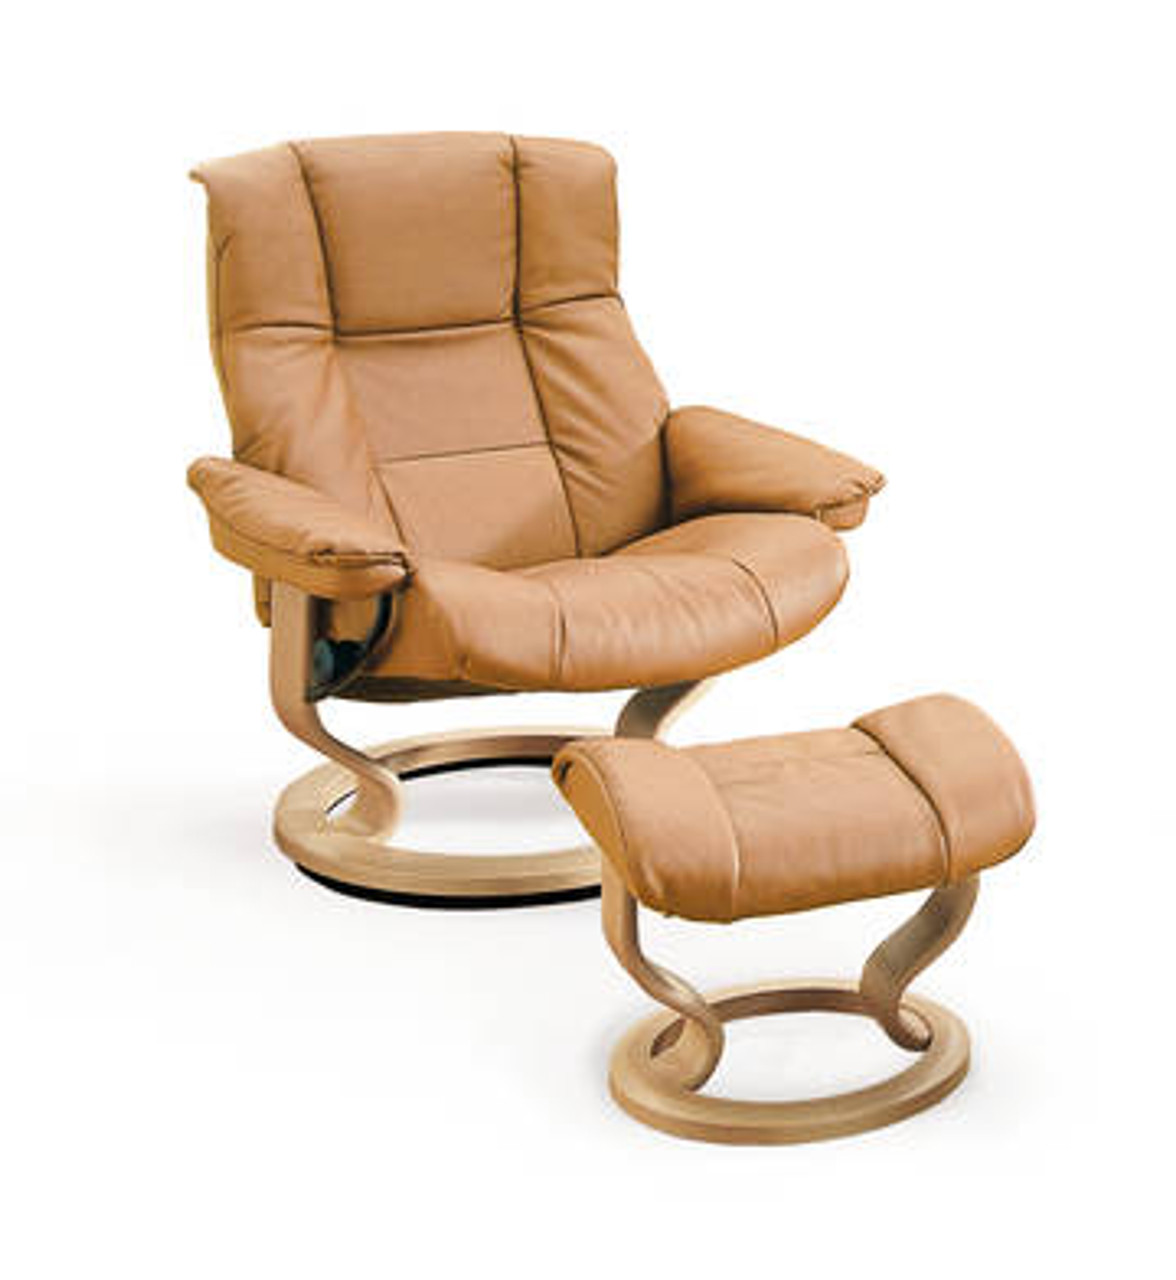 Recliners Mayfair Stressless | Ekornes Delivery Chairs & Stress-free